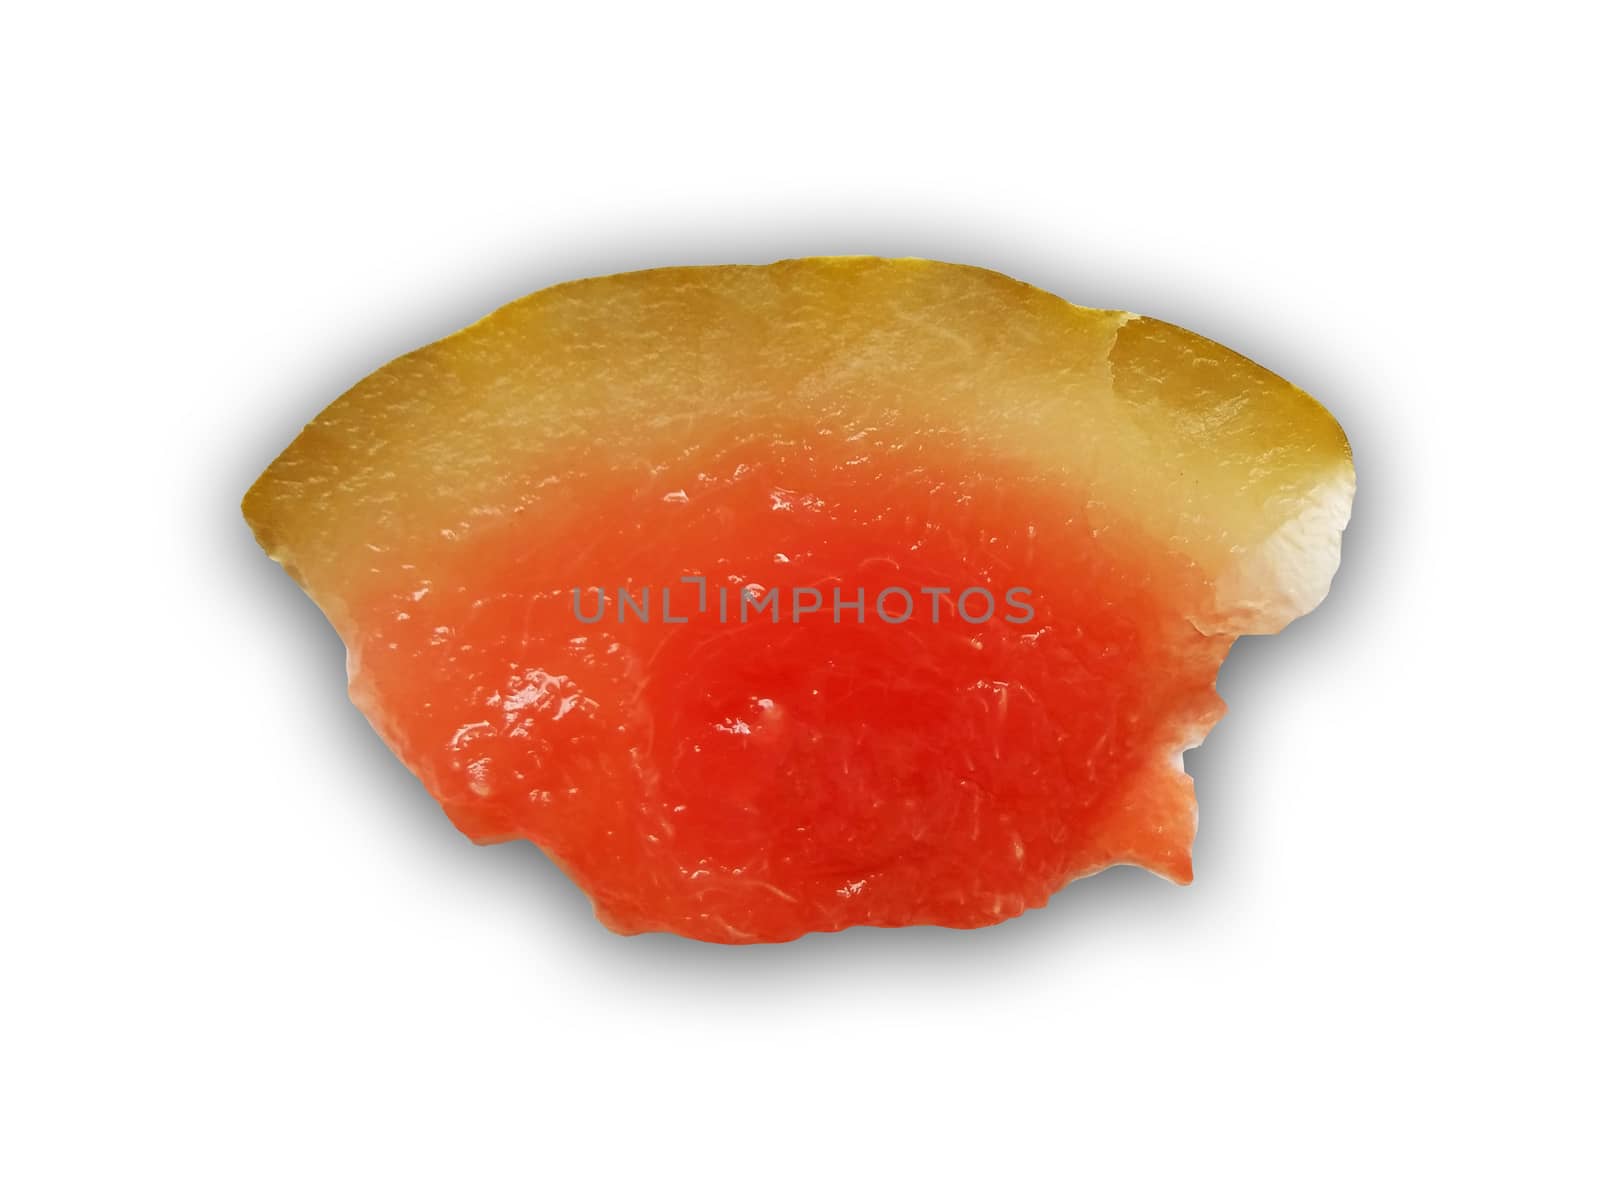 Pickled watermelon on white background by Mindru